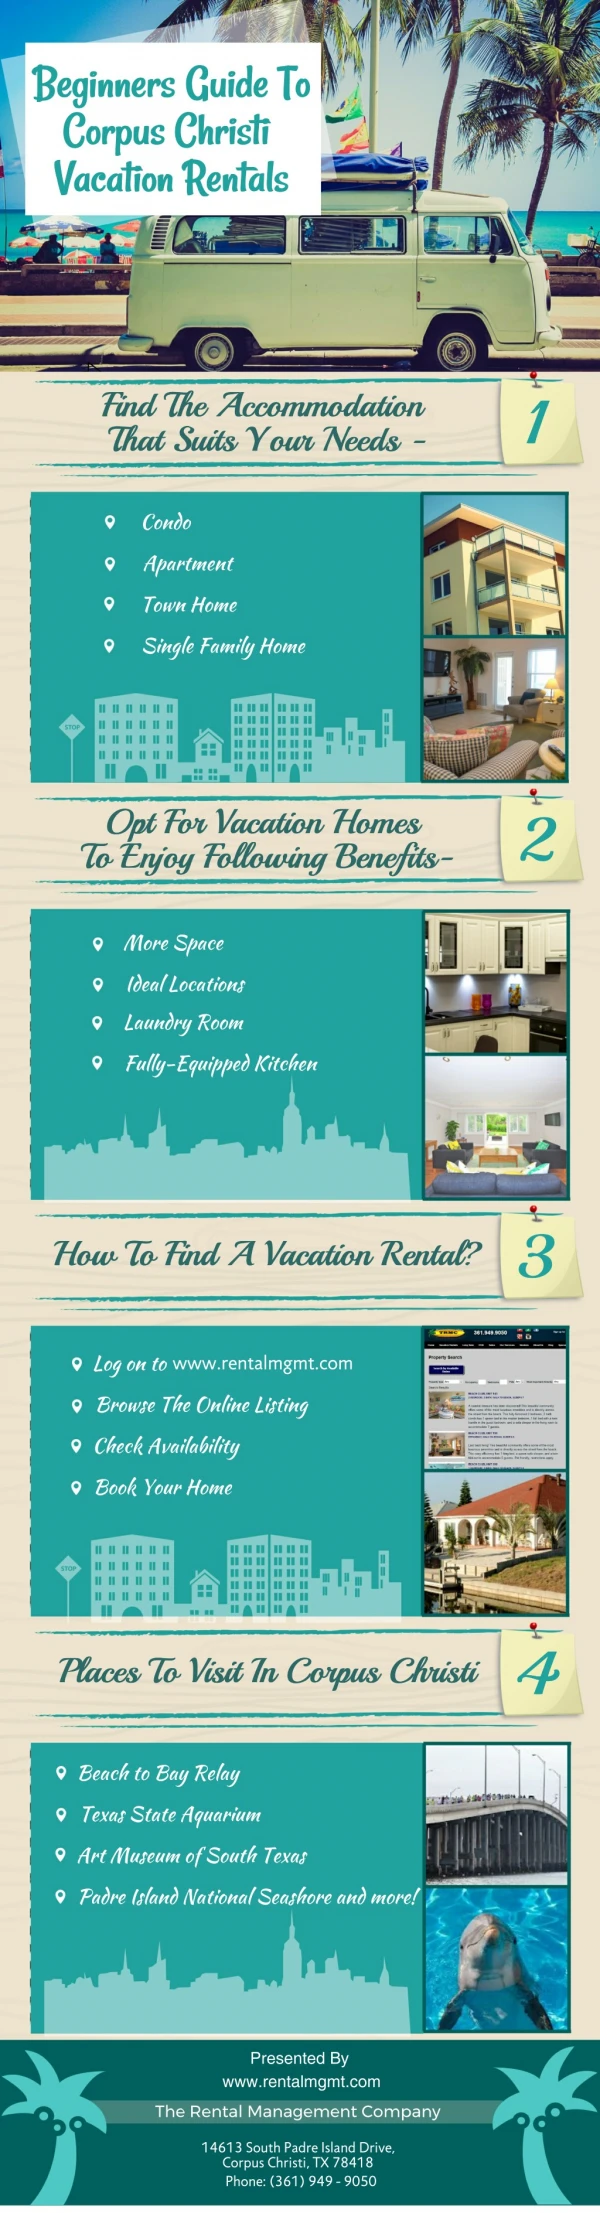 Beginners Guide To Corpus Christi Vacation Rentals